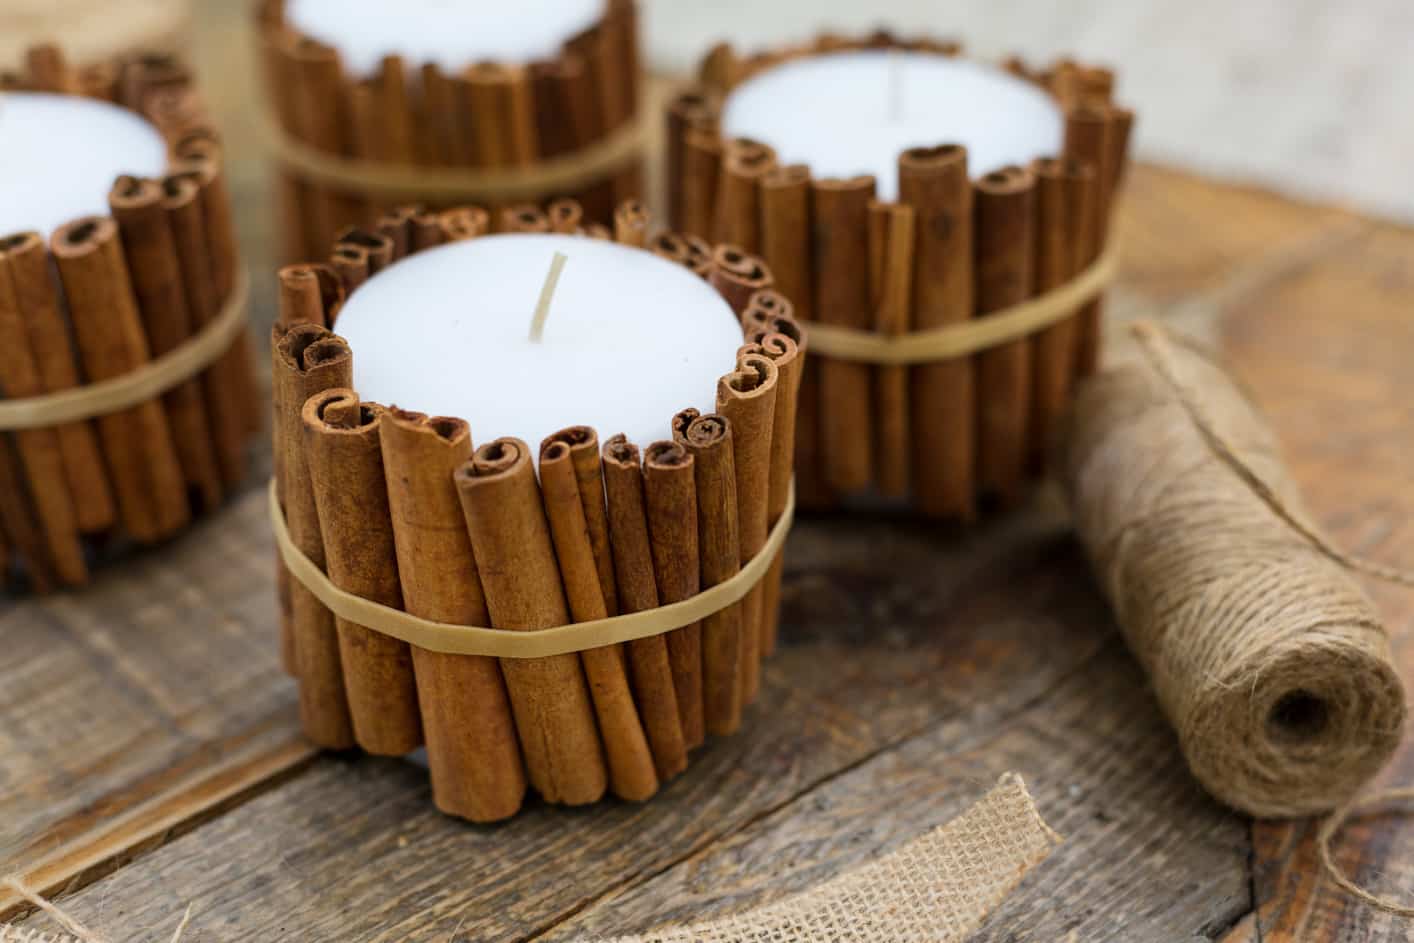 Louise Roe Cinnamon Stick Candles Centerpiece For Christmas